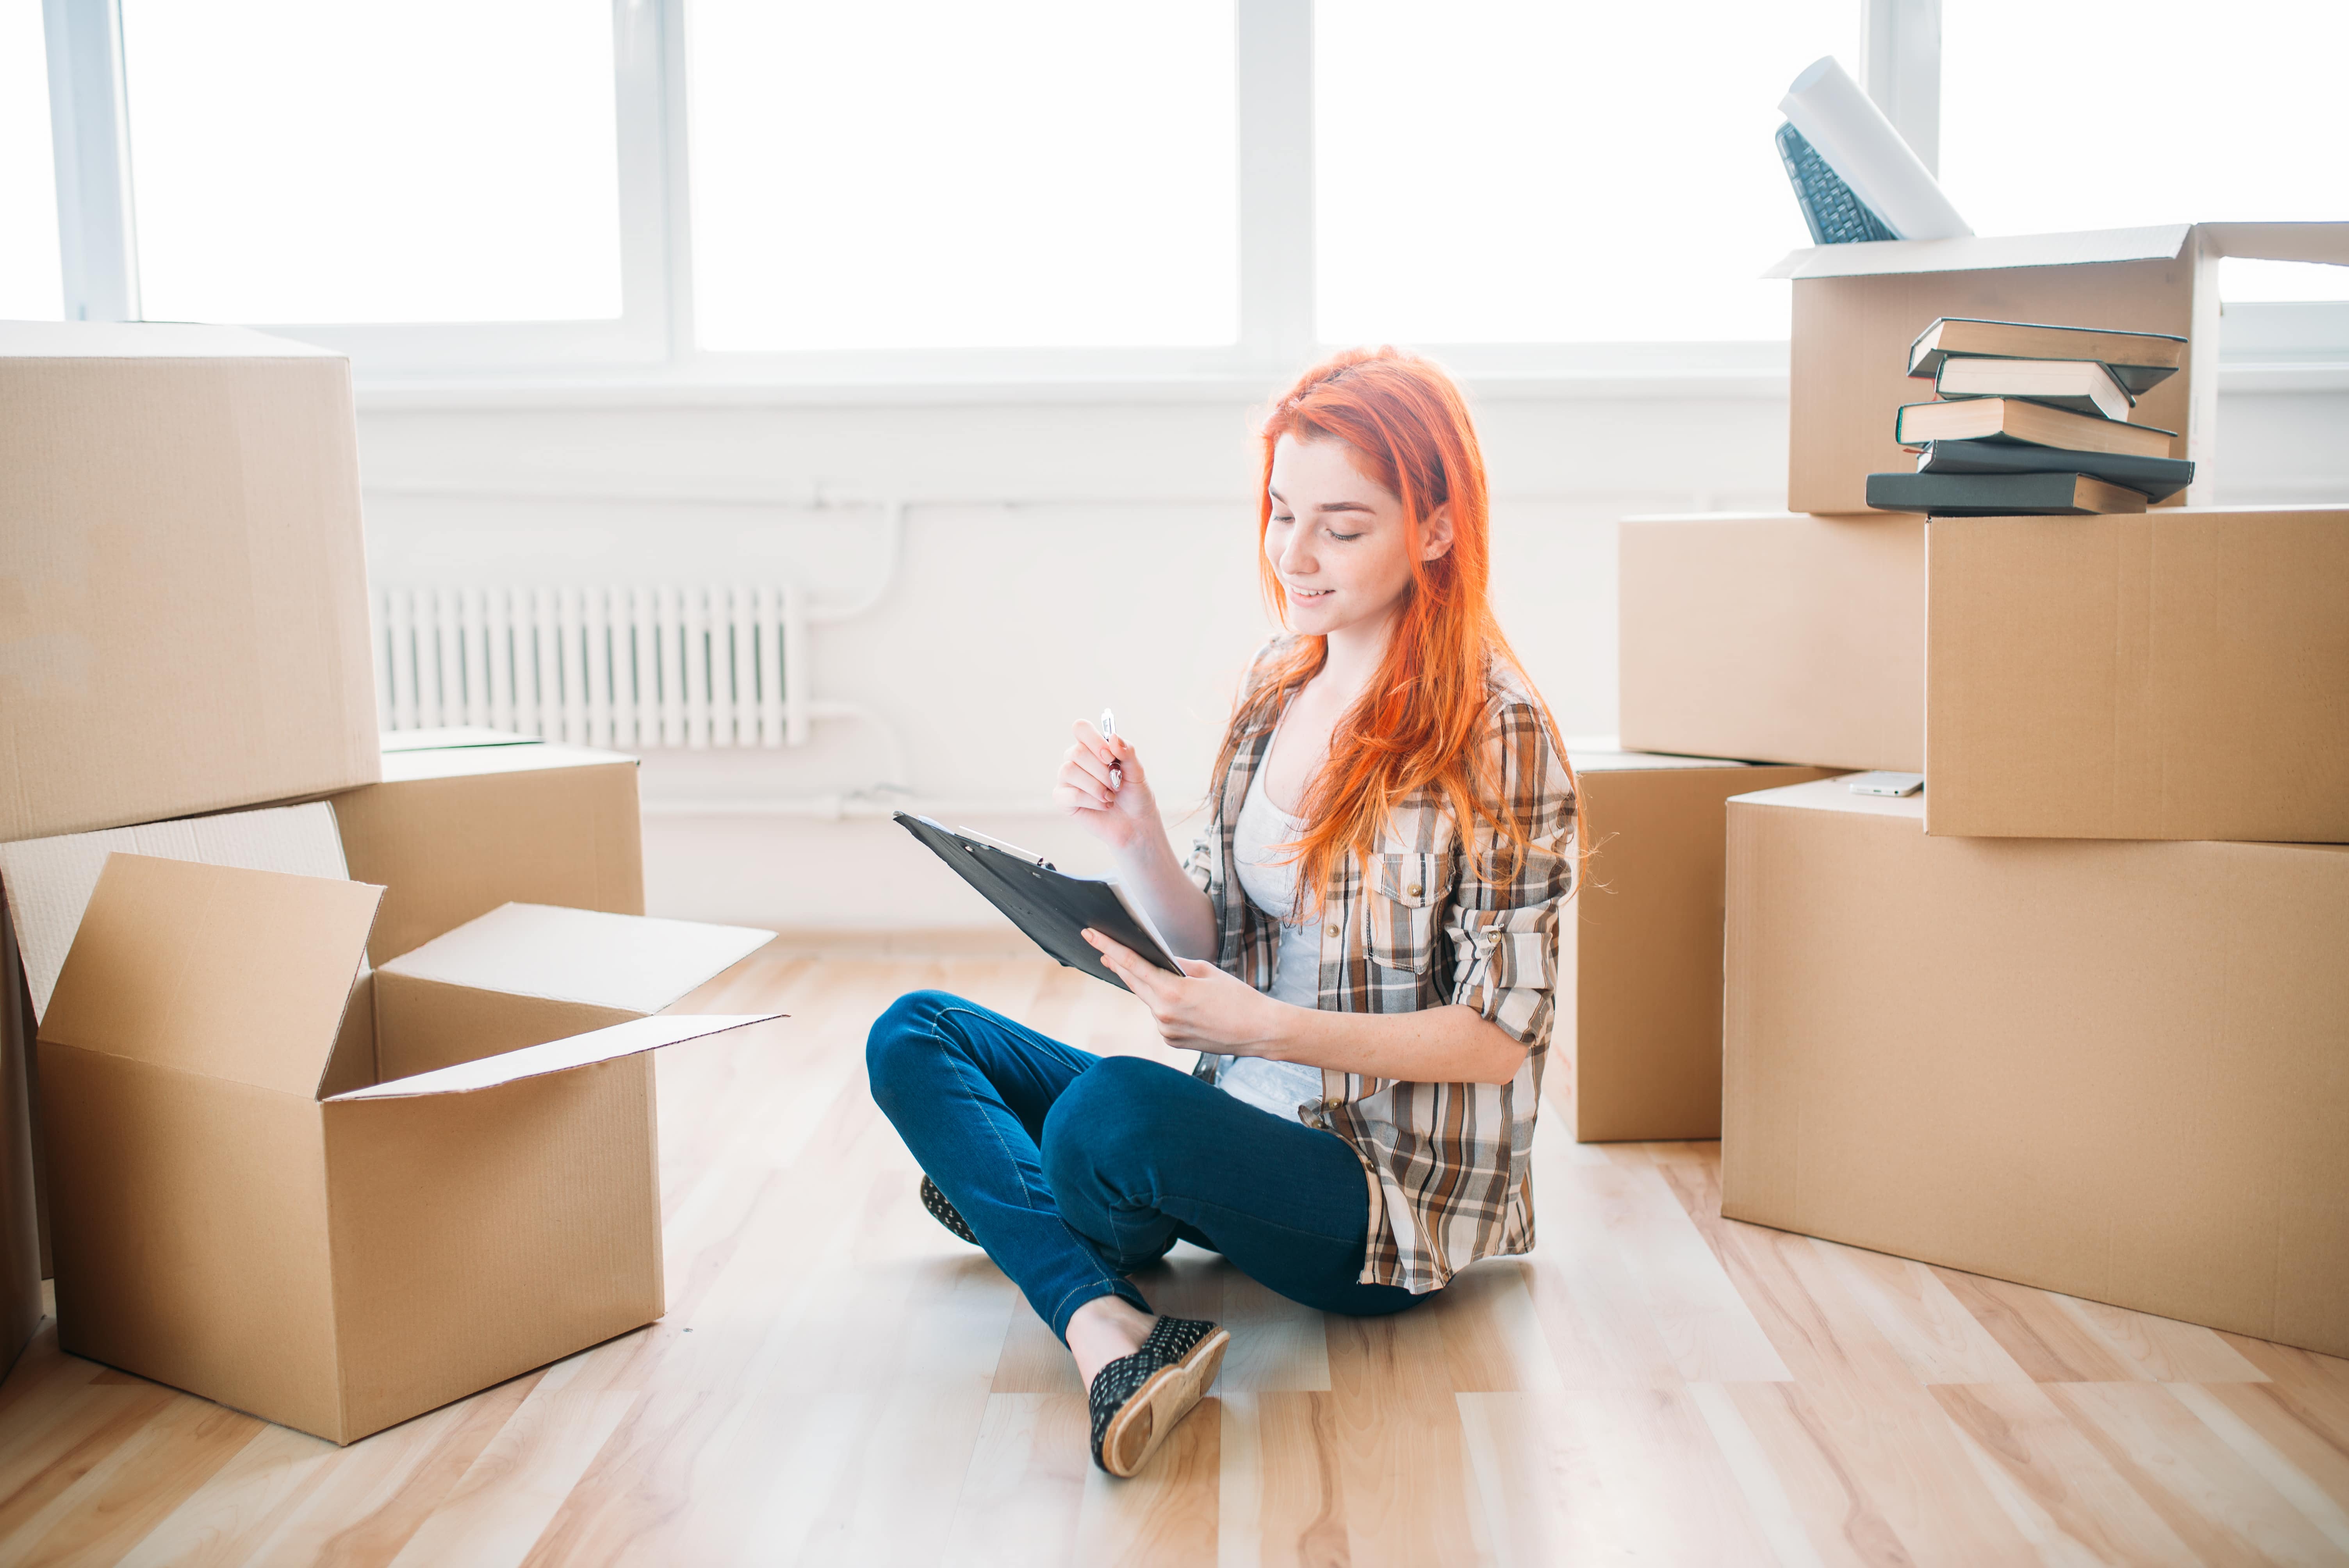 Rental Inspection Checklist for Moving In and Out